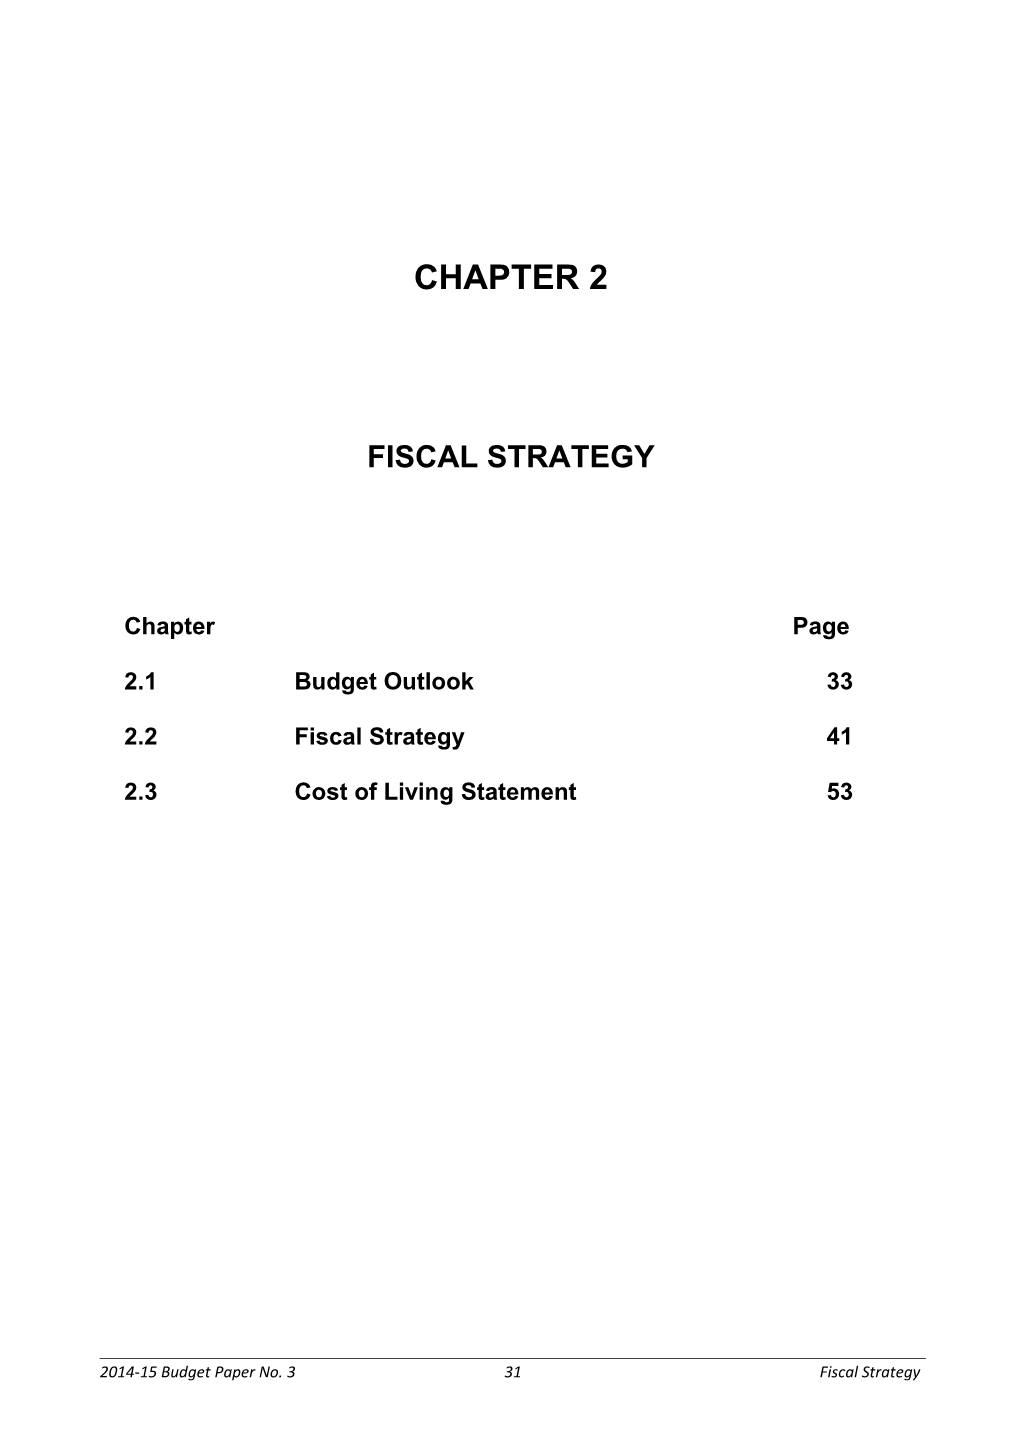 Chapter 2: Fiscal Strategy